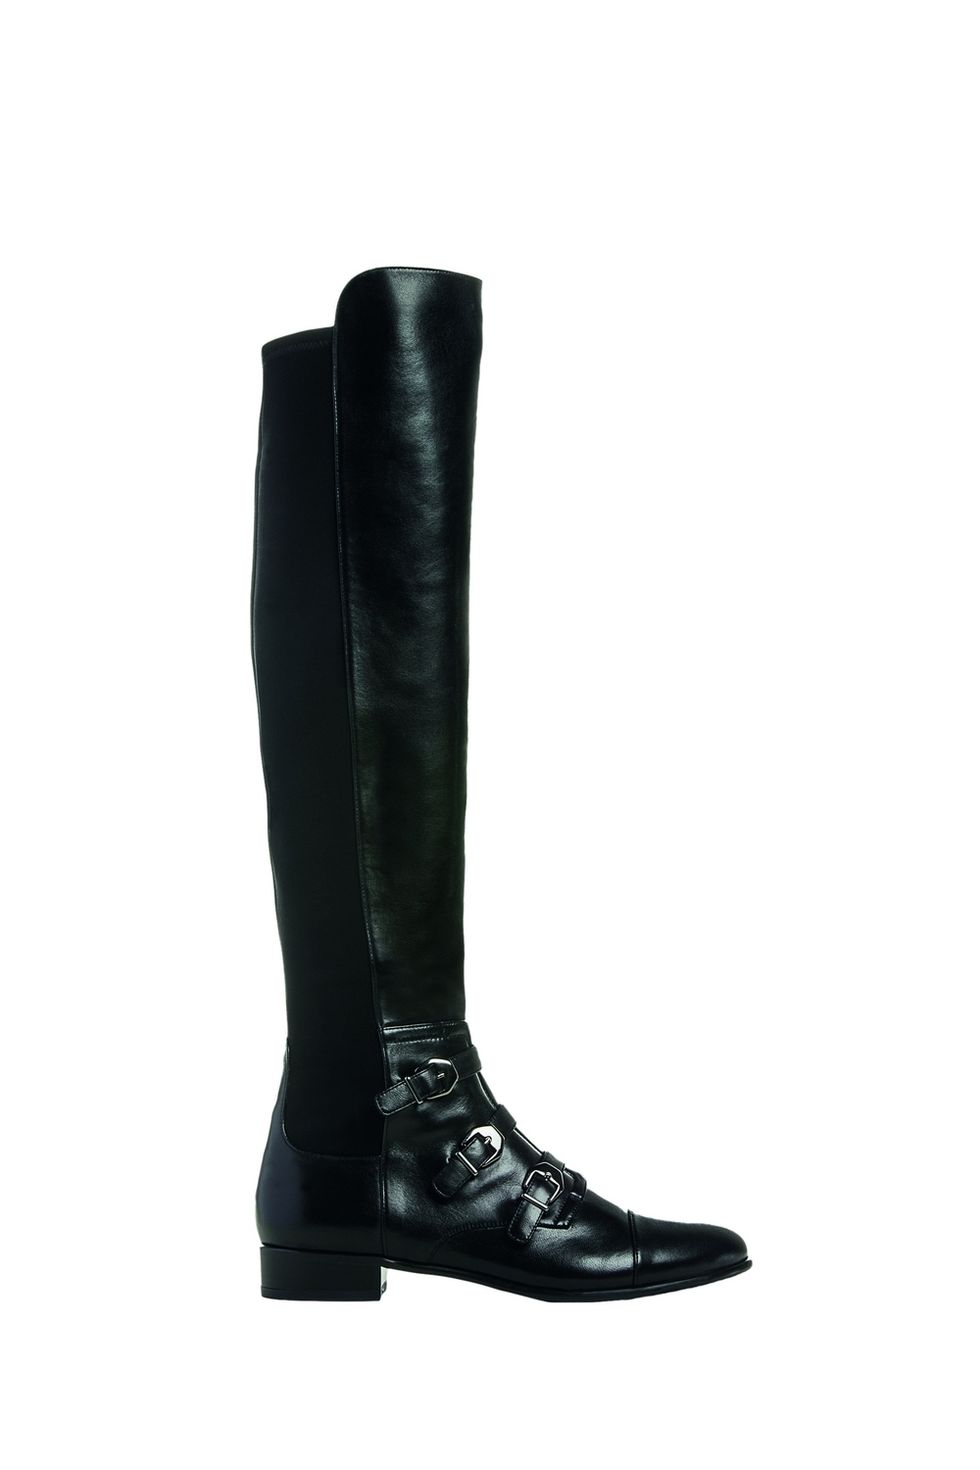 Boot, Shoe, Riding boot, Leather, Knee-high boot, Black, Motorcycle boot, Synthetic rubber, 